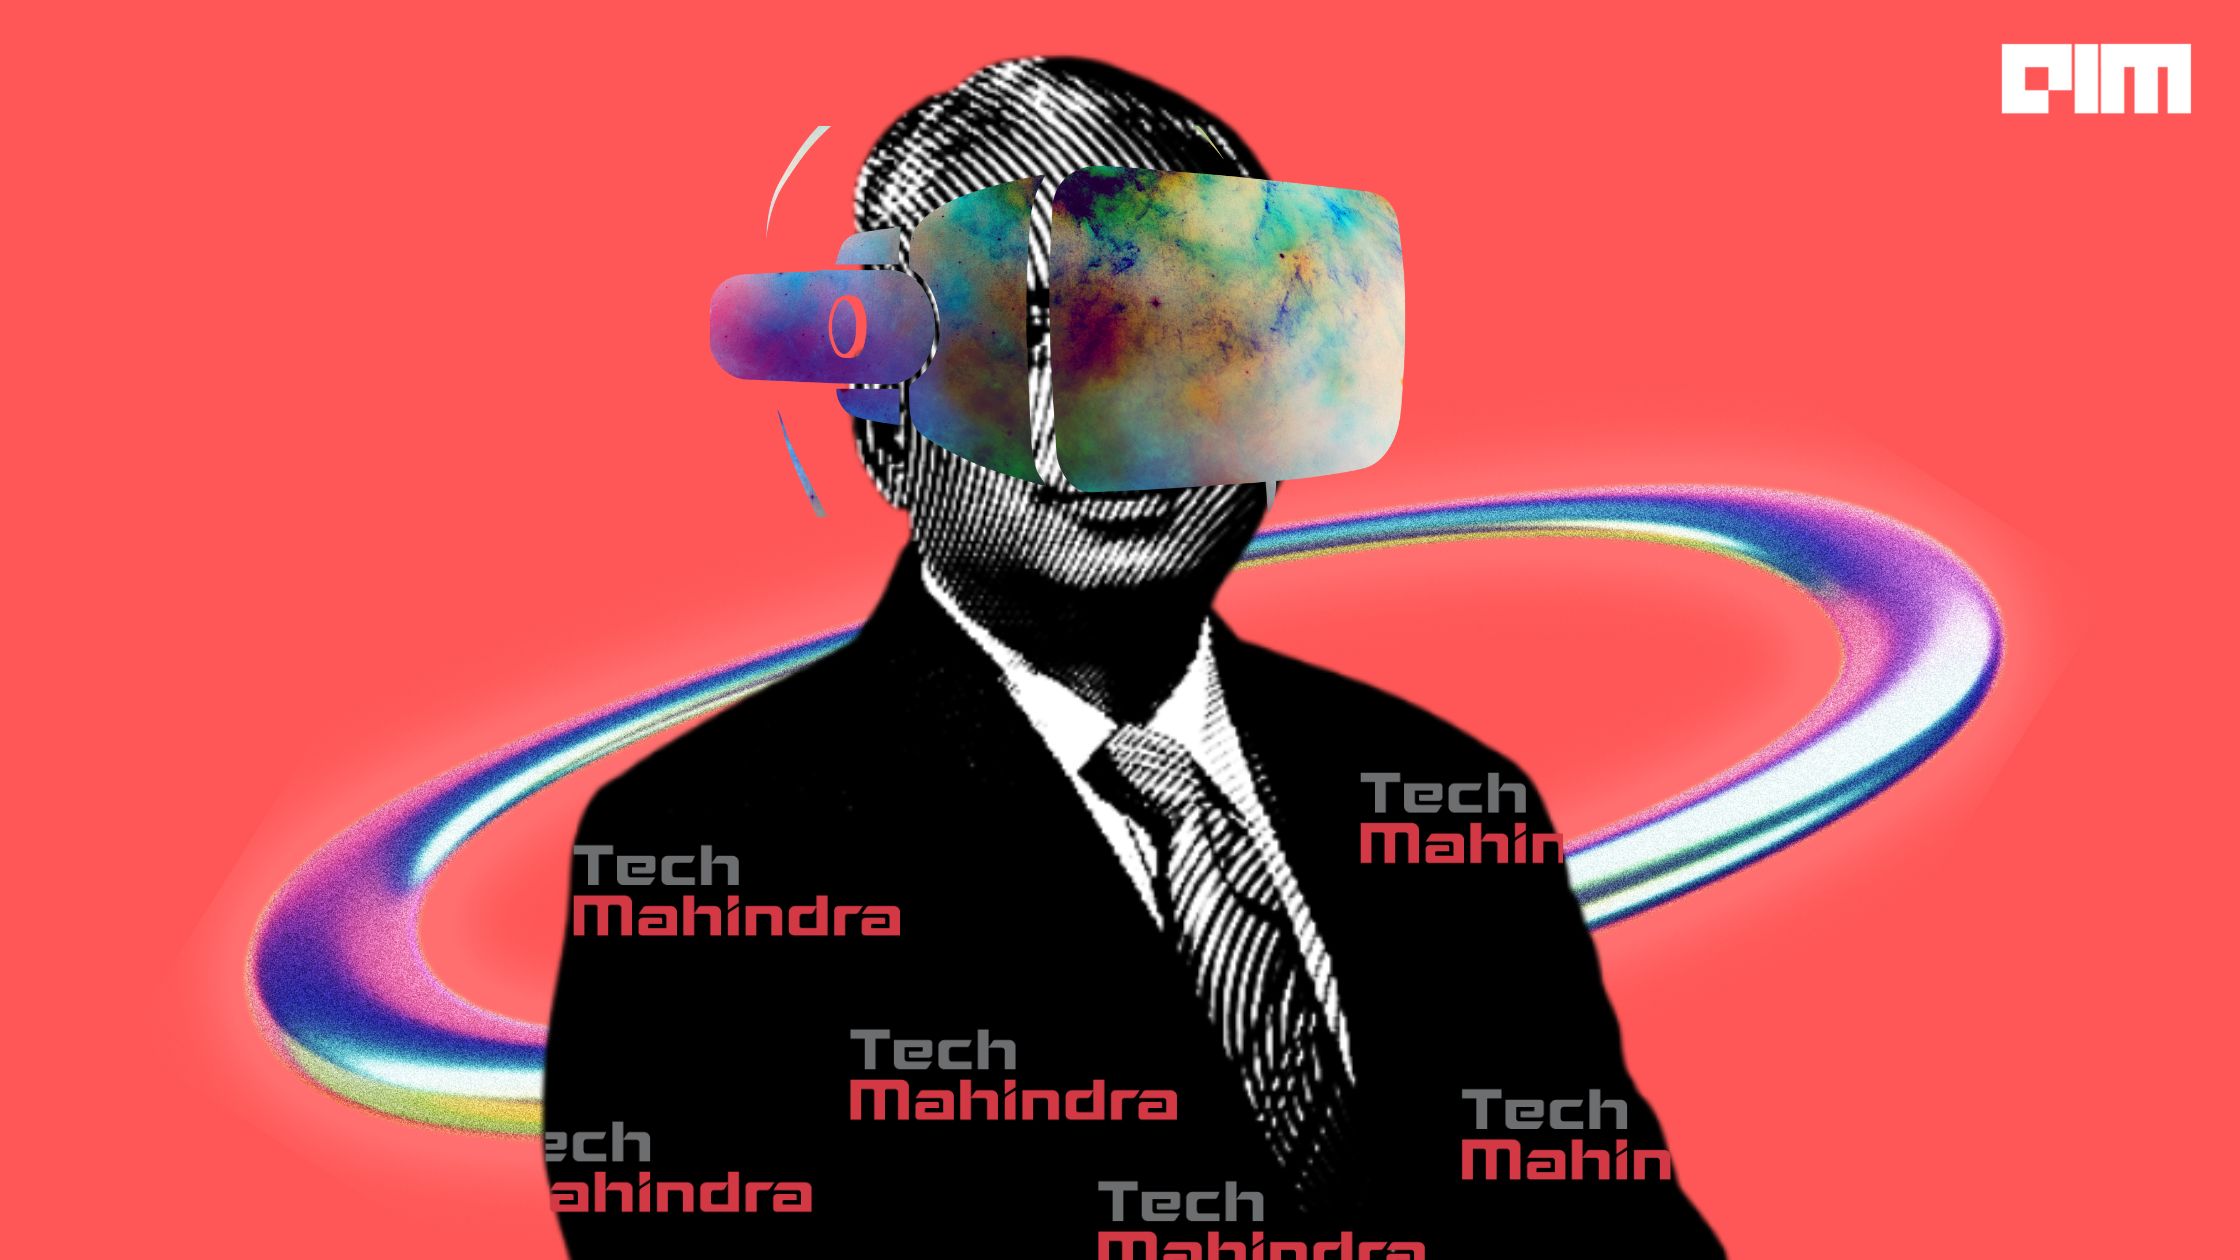 Tech Mahindra is working on 60 metaverse projects